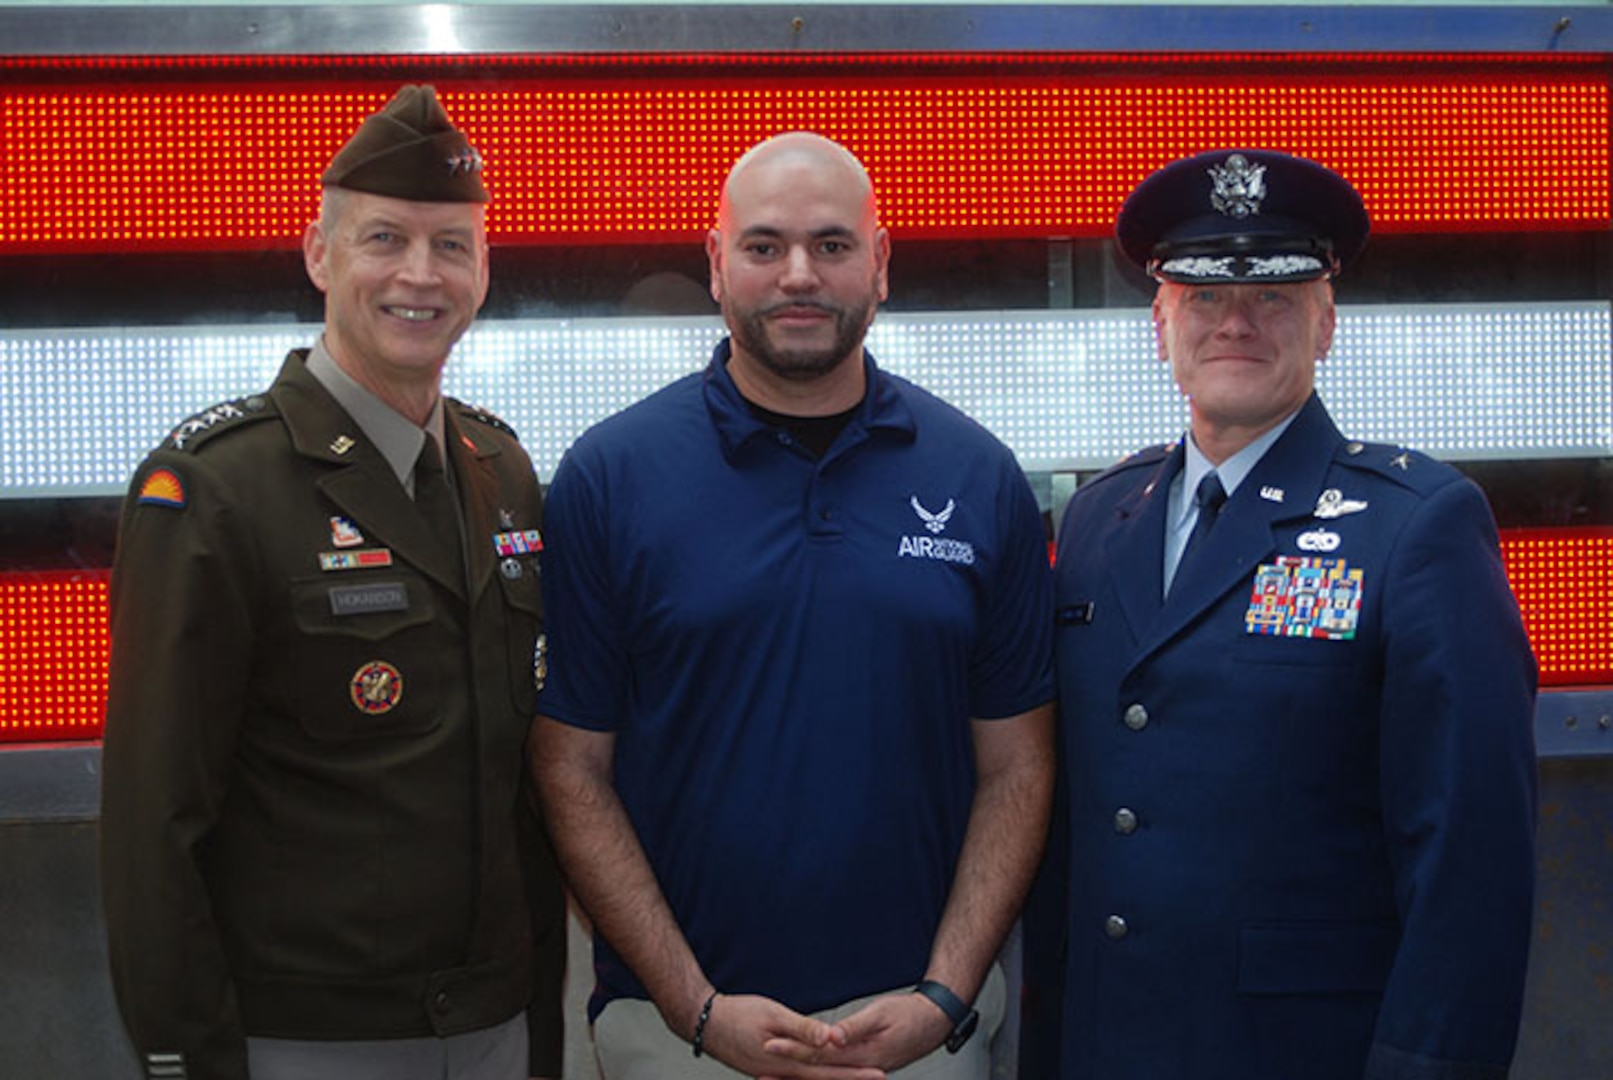 Army General Dan Hokanson, Chief of the National Guard Bureau, poses with Brig. Gen. Gary Charlton, commander of the New York Air National Guard's 105th Airlift and the wing’s newest member, Airman William Barrow, a former FDNY firefighter who served at the World Trade Center on 9/11 following his oath of service ceremony at the Time Square Recruiting Station in New York, September 11, 2023.